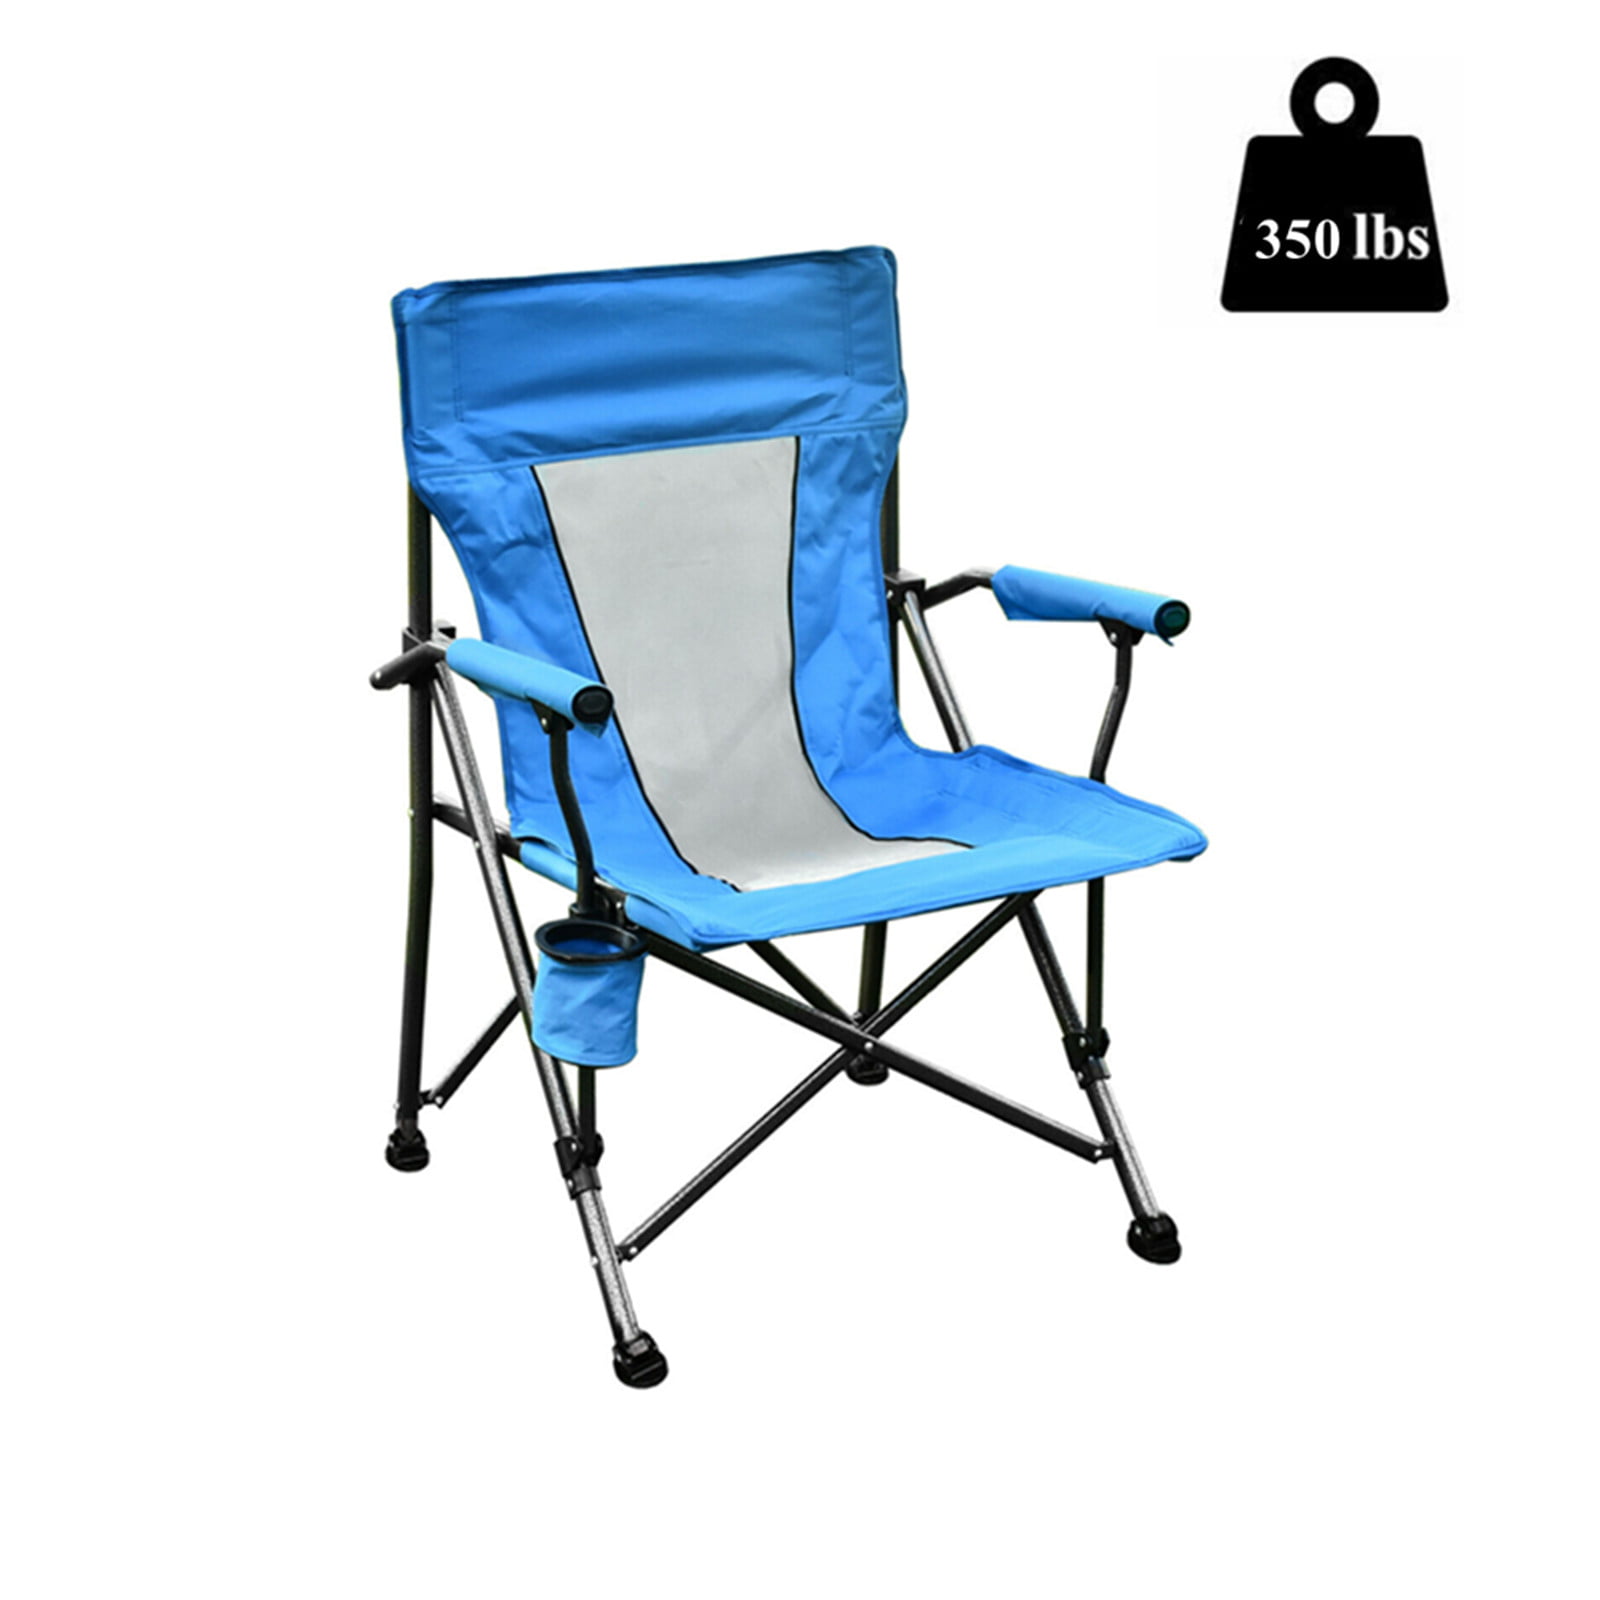 1x Folding Portable Garden Camping Fishing Festival Folding Chair Cup Holder New 